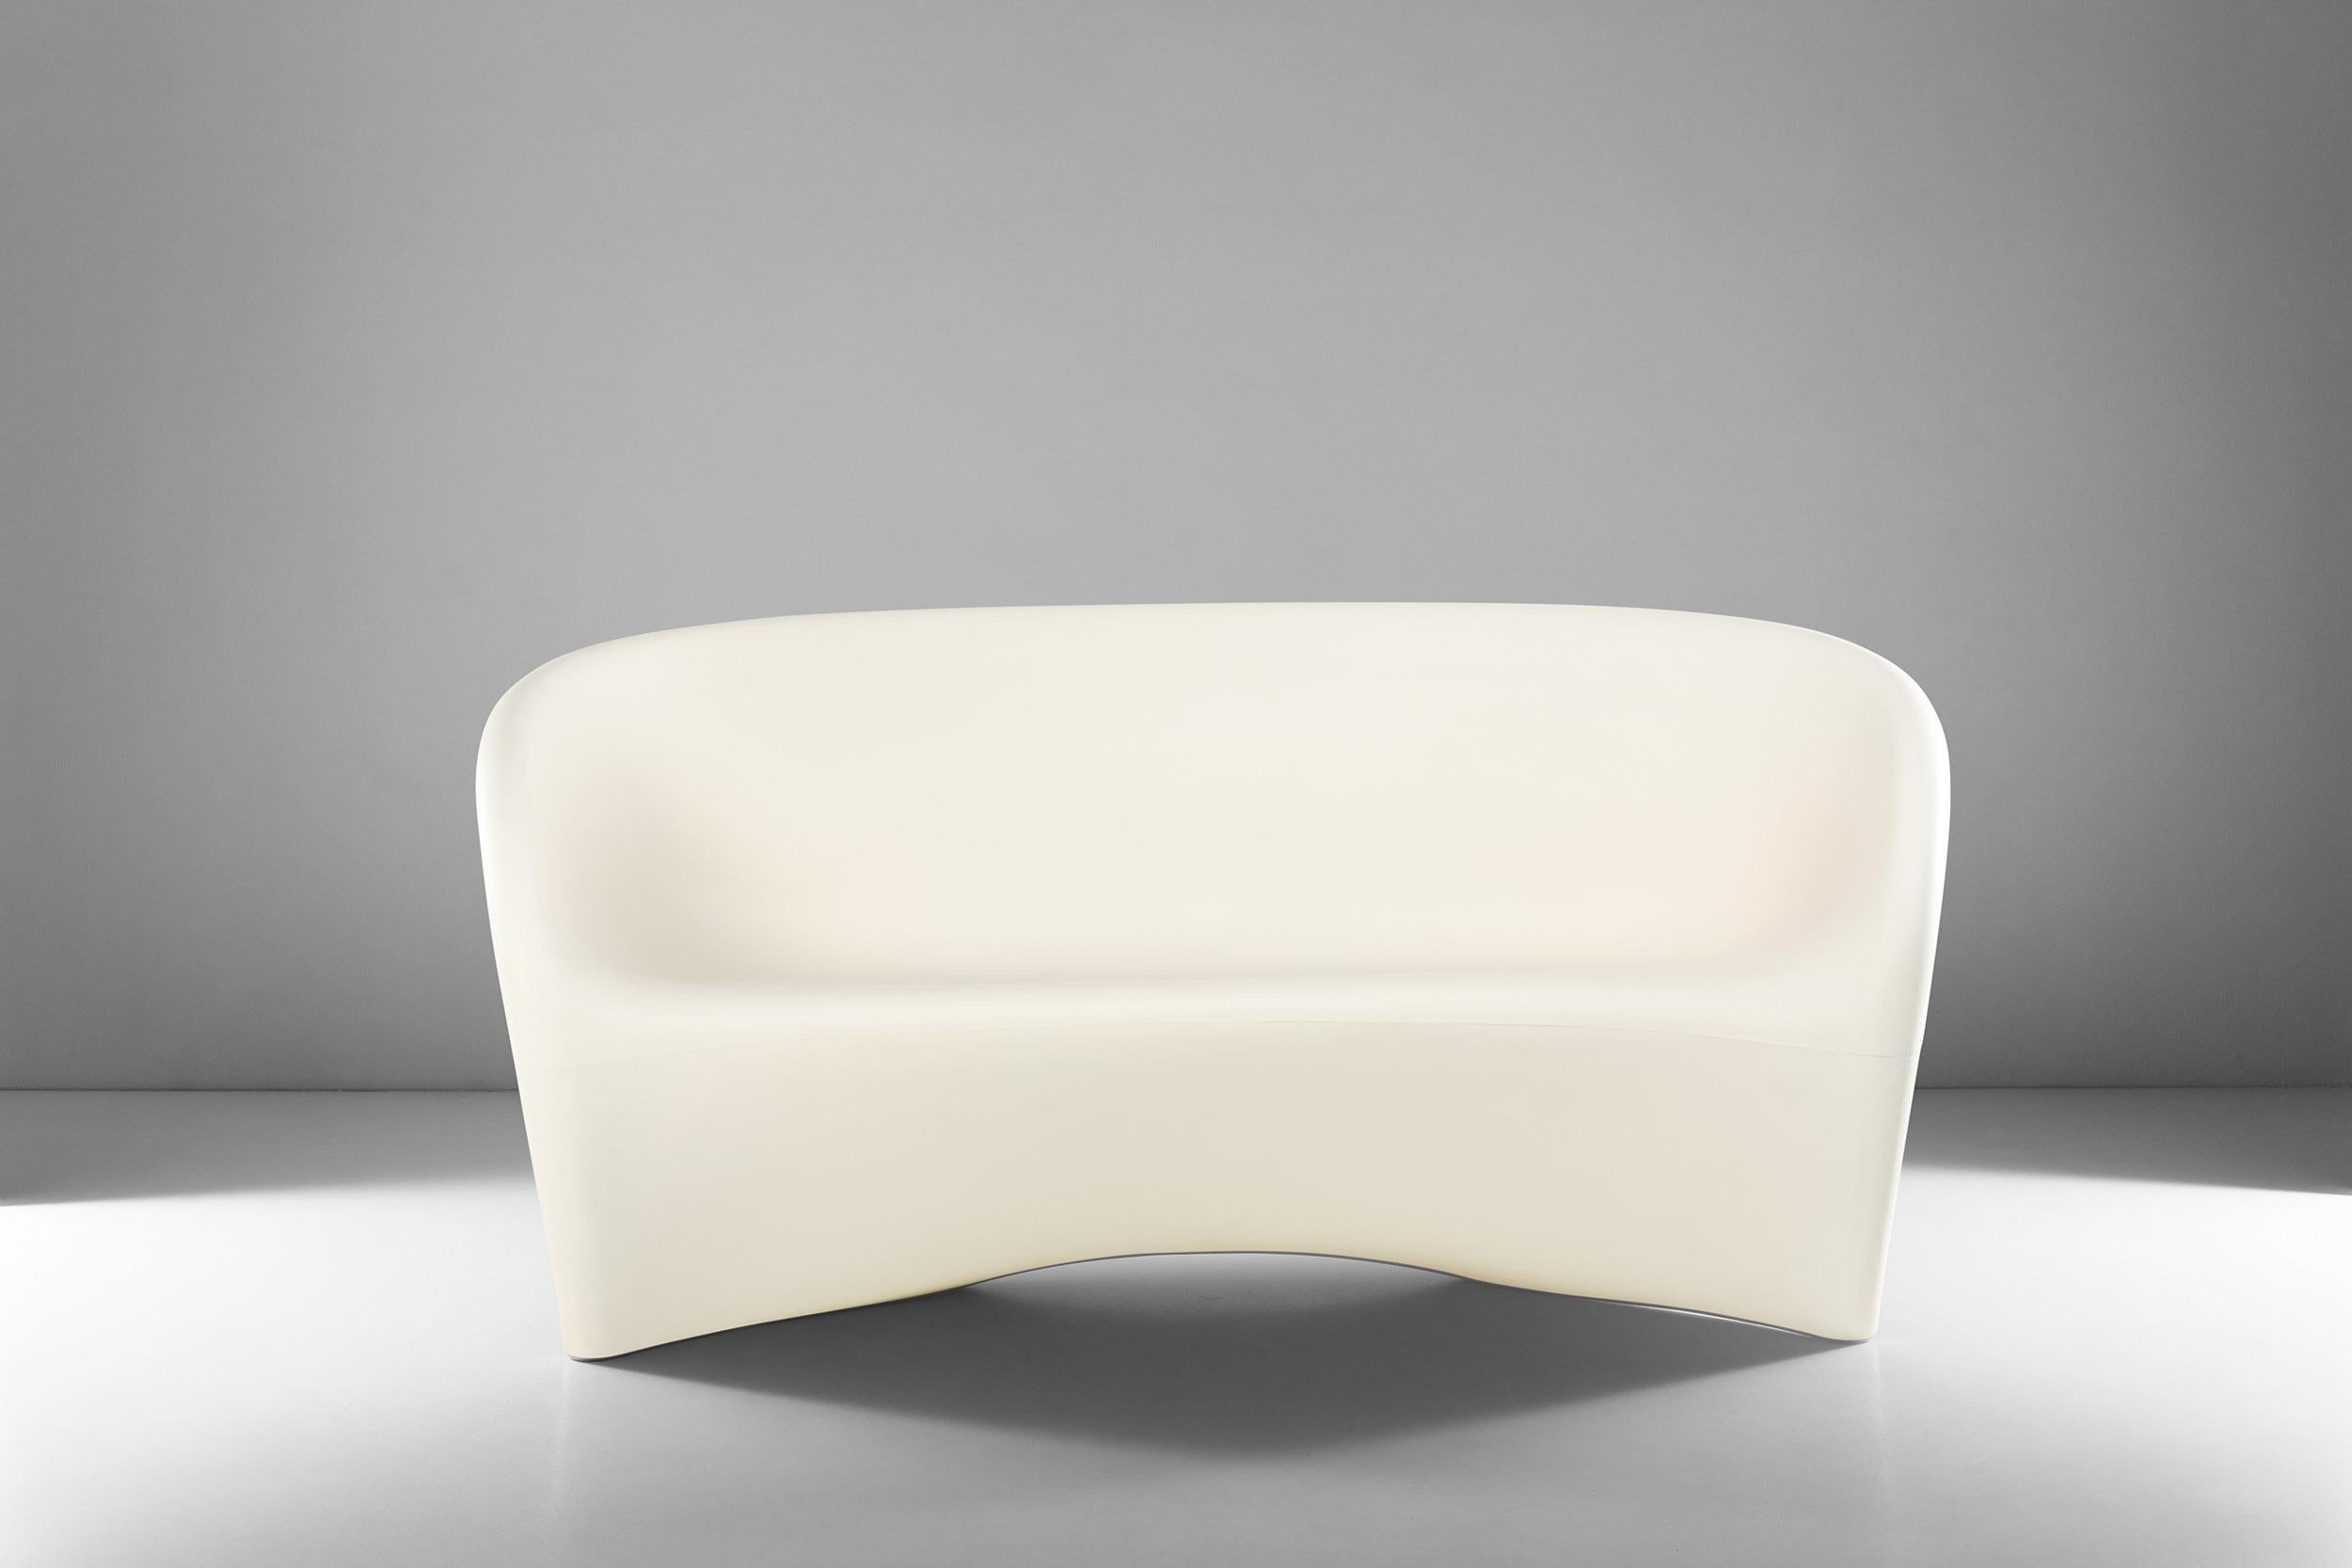 Innovation, experimentation of the materials and forms. This sofa is an iconic sculptural polyethylene monobloc sofa, designed by Ron Arad and manufactured by Driade, sand white colored outside and red colored inside. Perfect for both indoor and